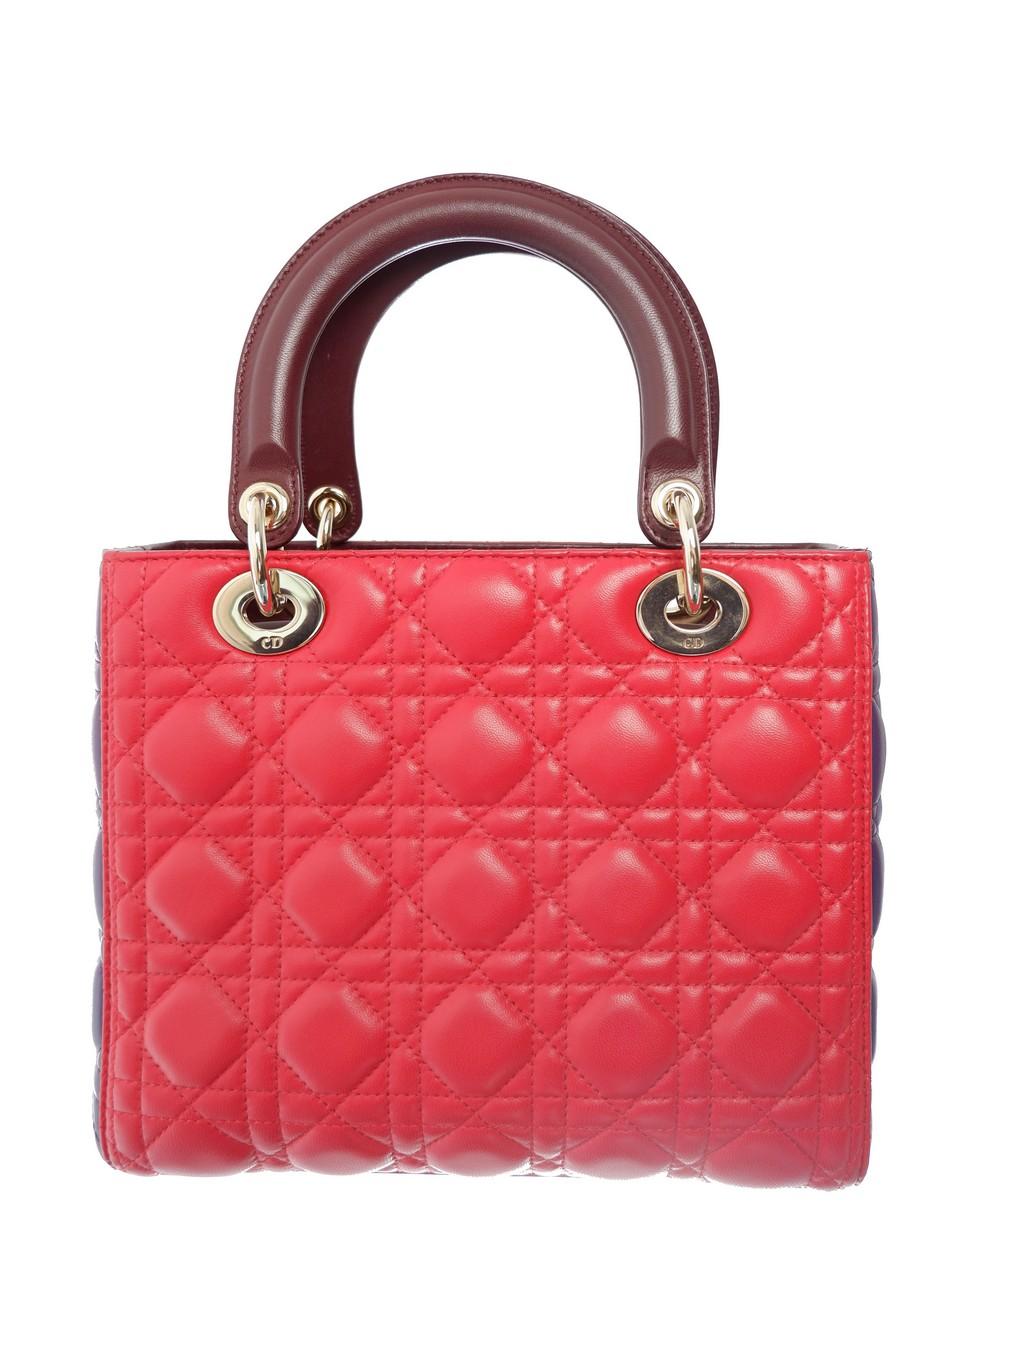 Red and purple quilted pattern embroided lambskin leather Christian Dior multicolor Cannage medium tote bag features leather and dangling Dior letter charms comes with silver-tone hardware, double flat leather top handles and a removable long